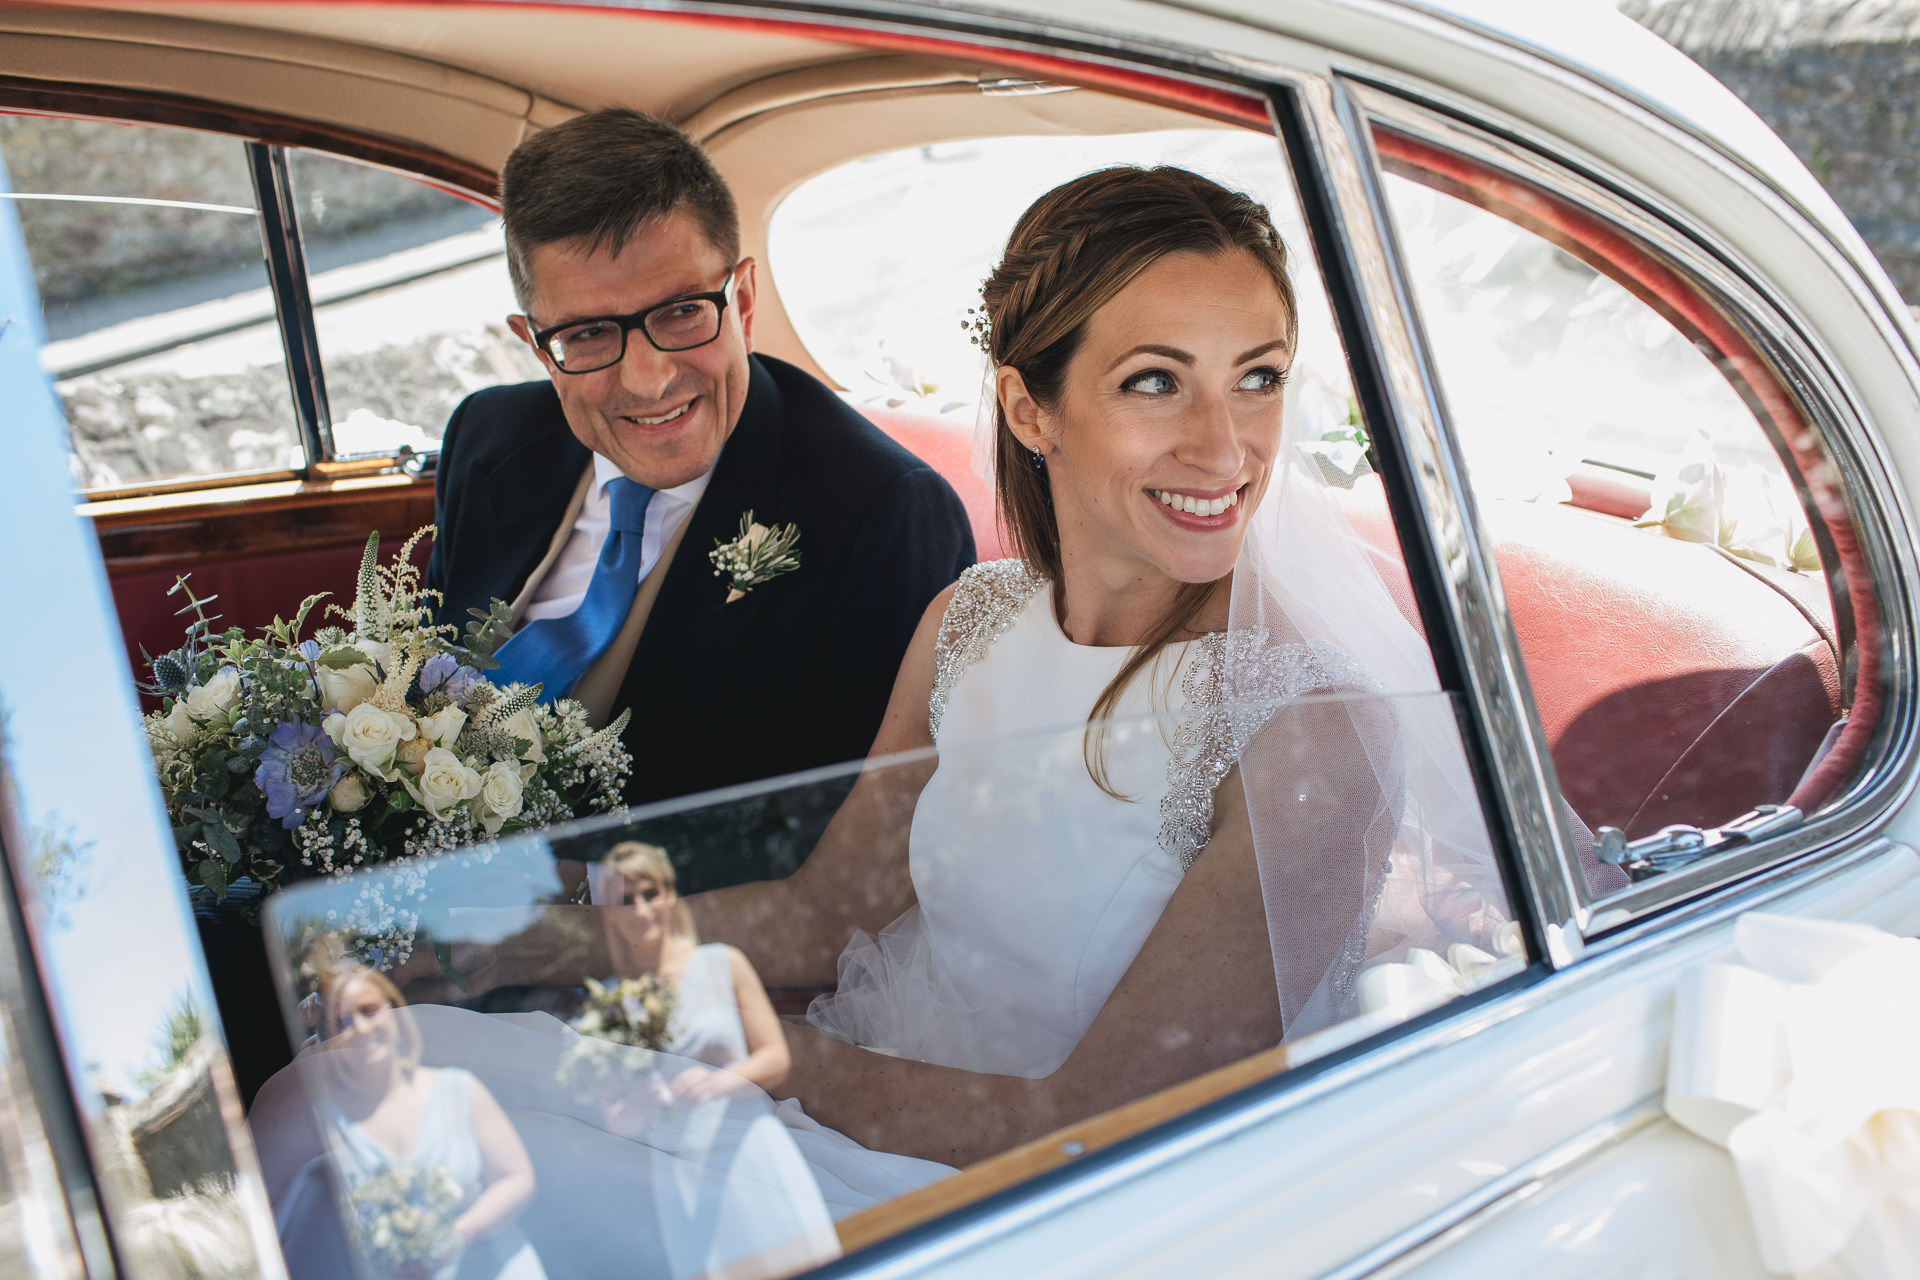 A bride arriving in a car with her father